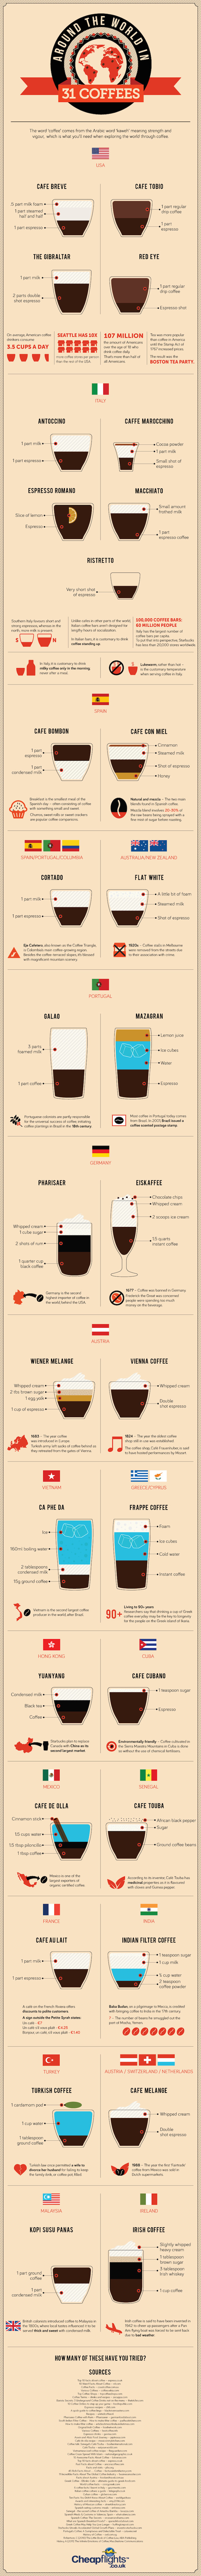 Around-the-world-in-31-coffees2